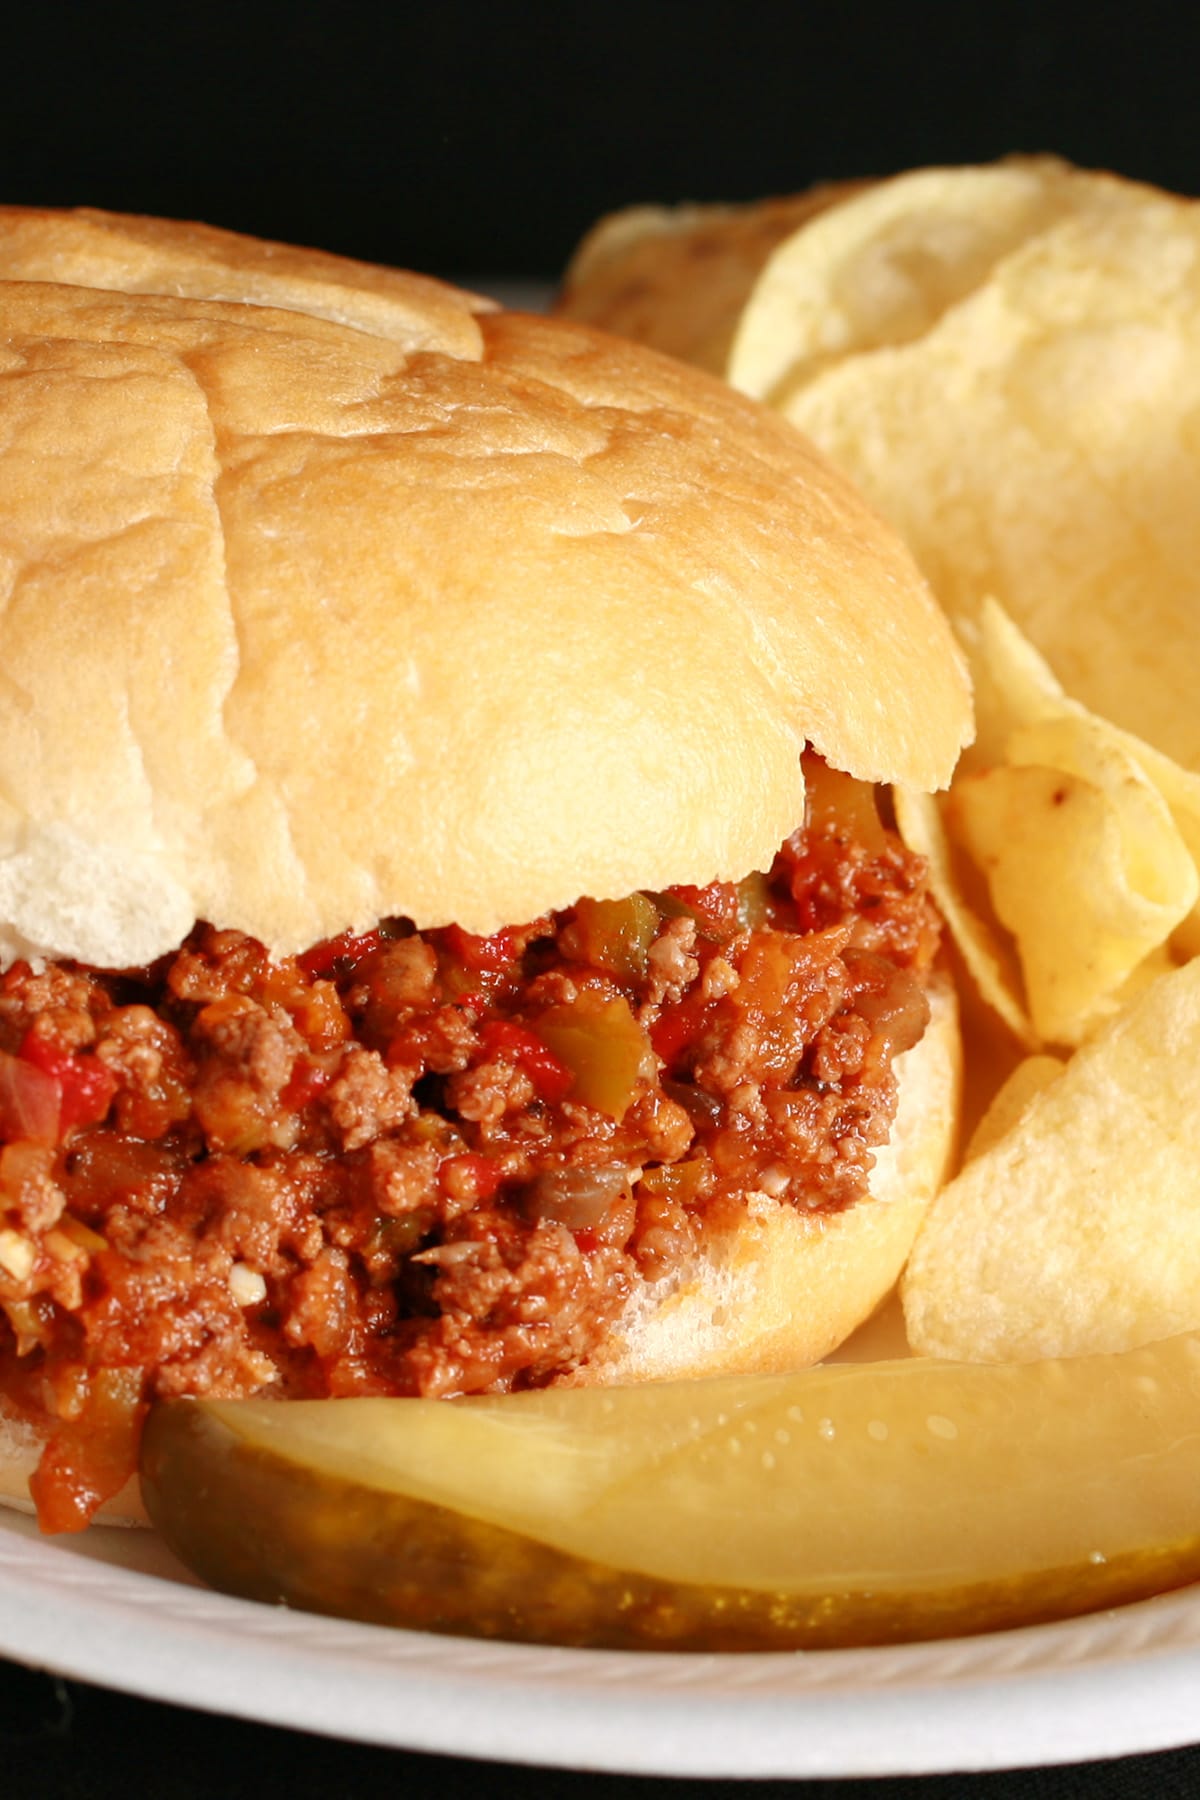 A Convention Sloppy Joes sandwich on a paper plate, with chips and a pickle spear.